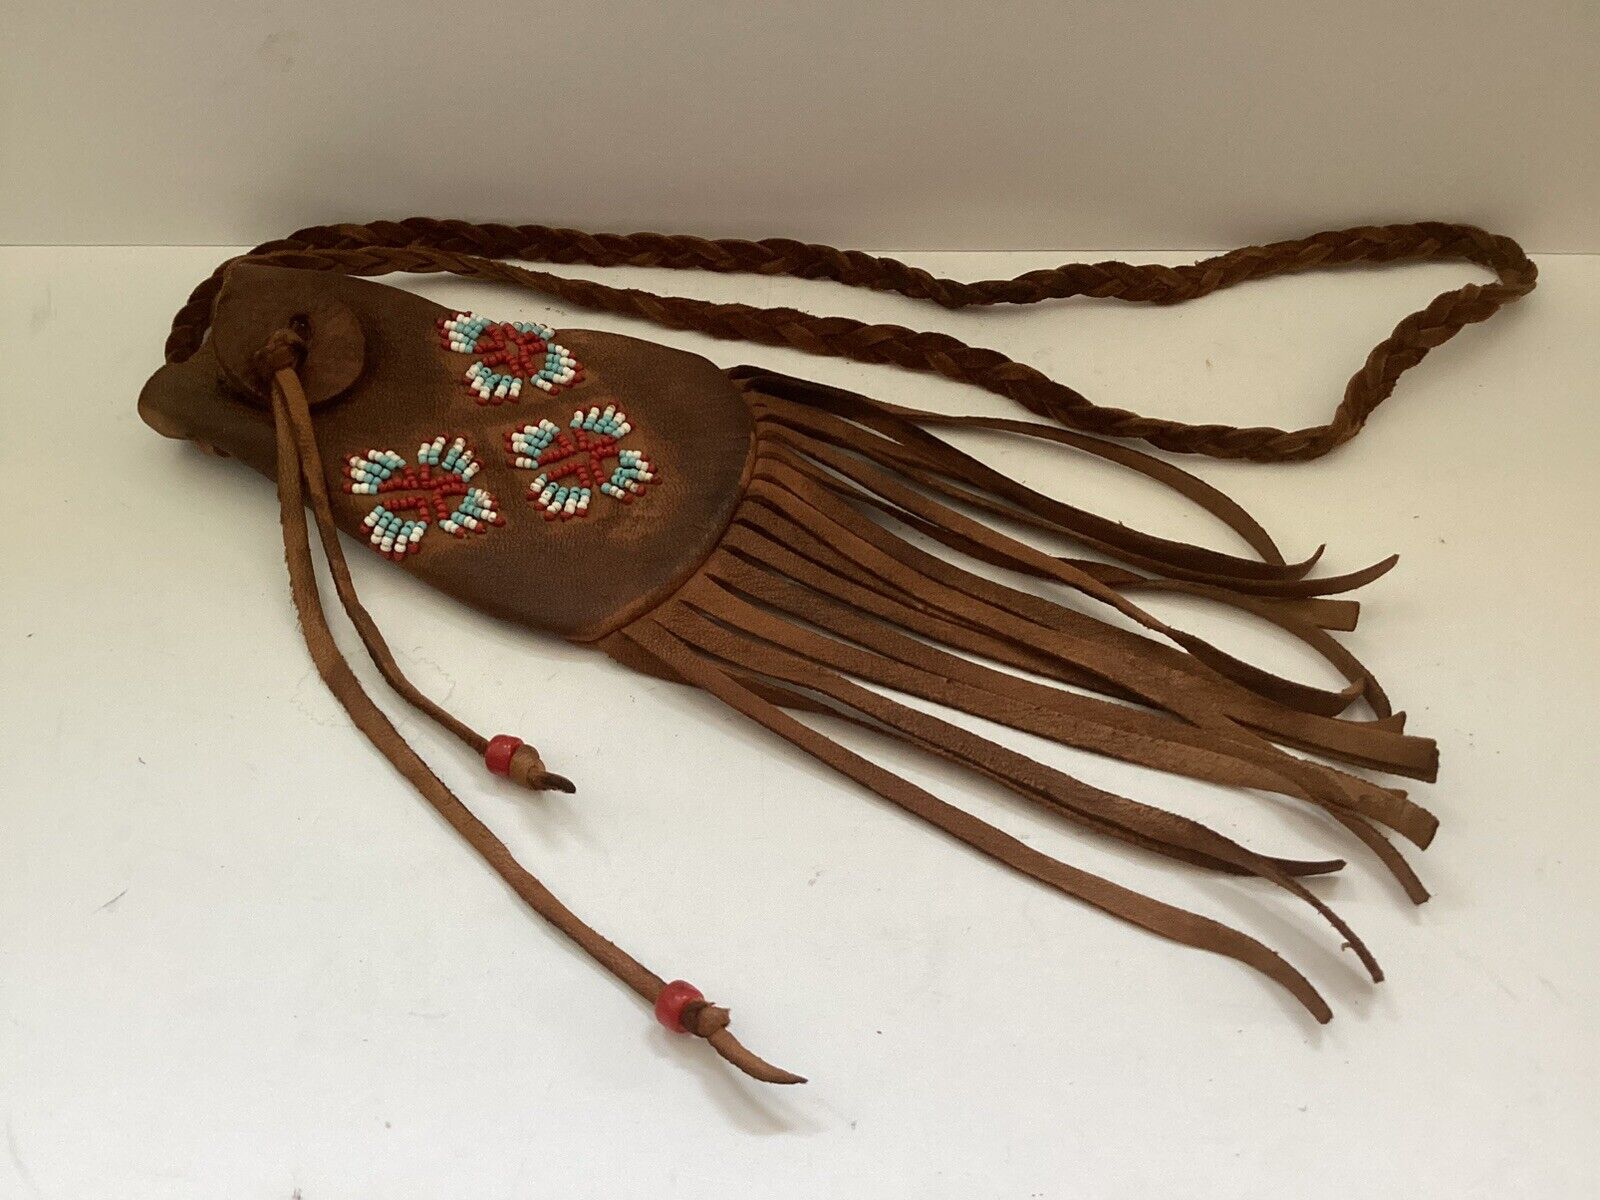 Tobacco Pouch_Handmade_Beaded Leather_16” Braided Strap_Fringed_Vintage